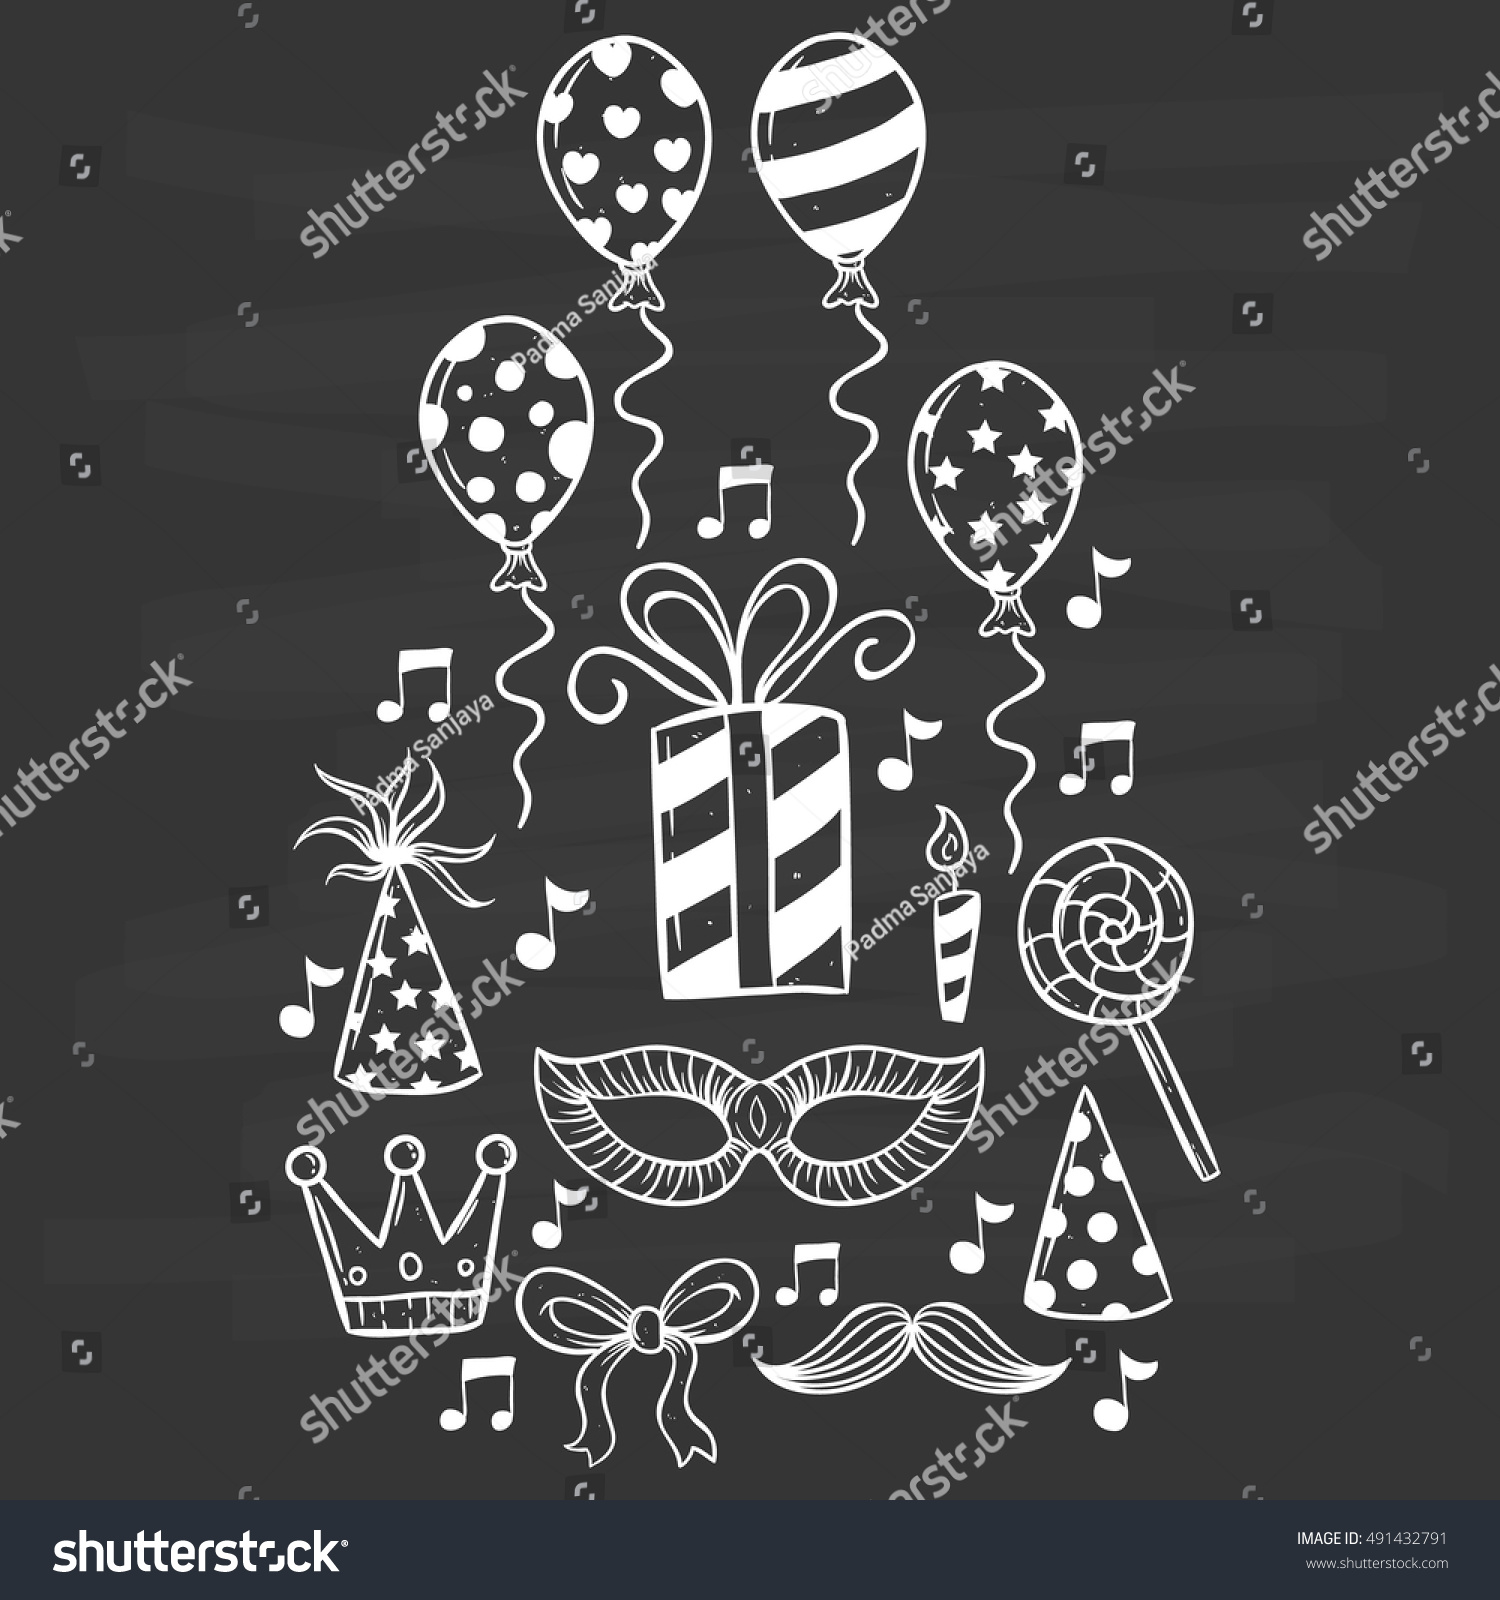 Cute Birthday Icons Collection Using Hand Stock Vector Royalty Free